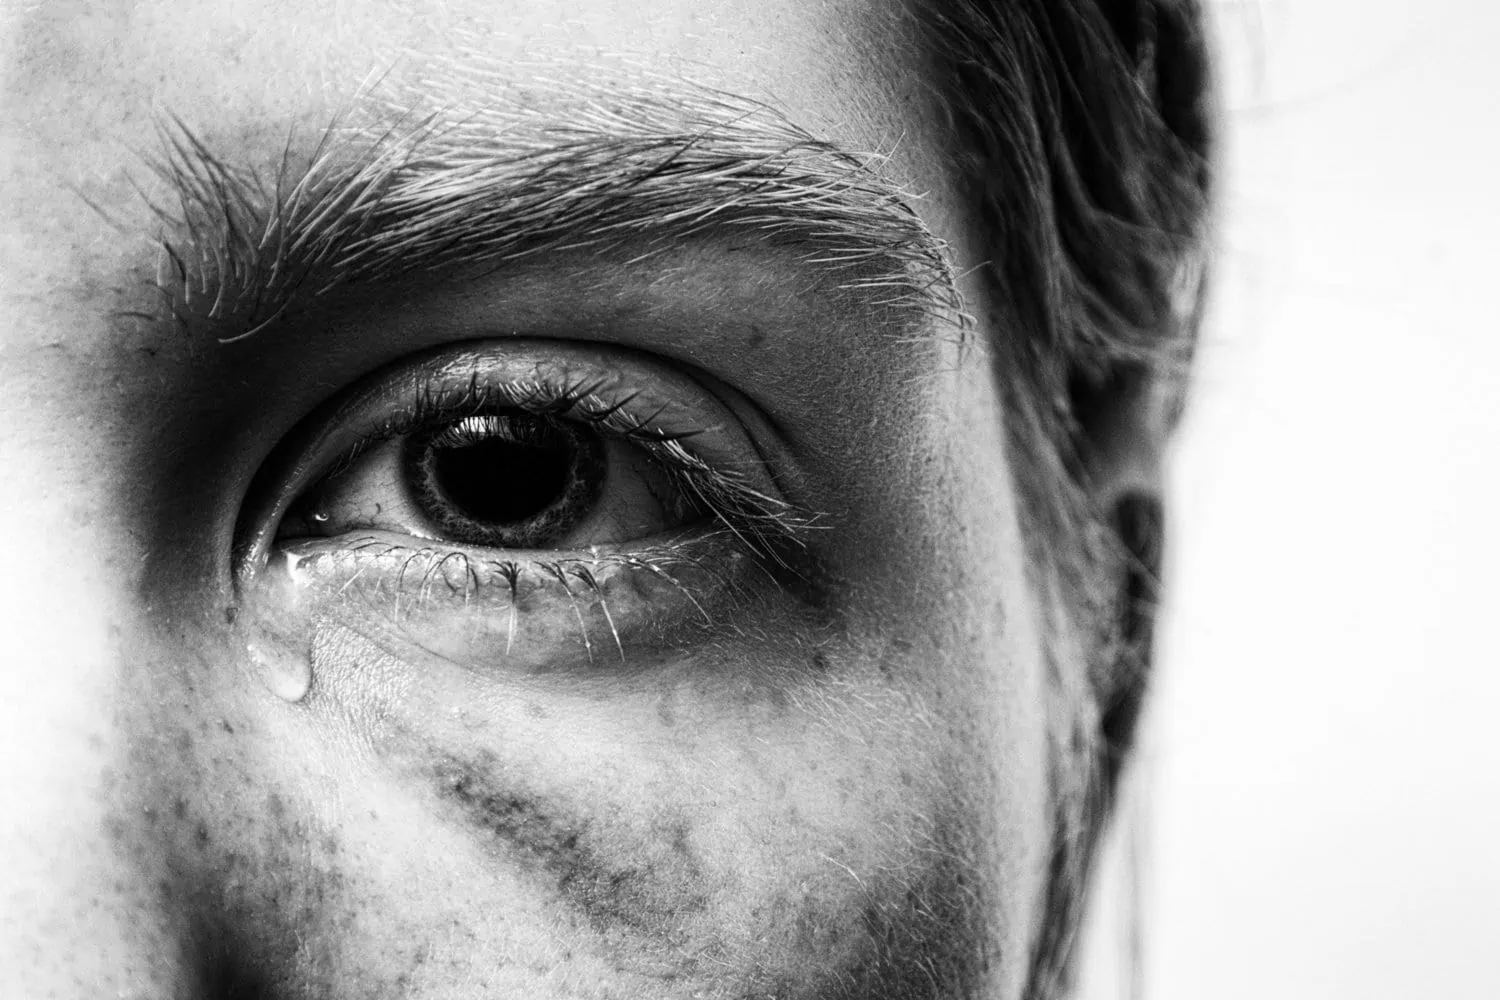 Woman who experience domestic abuse with black eye, not feeling safe after her trauma